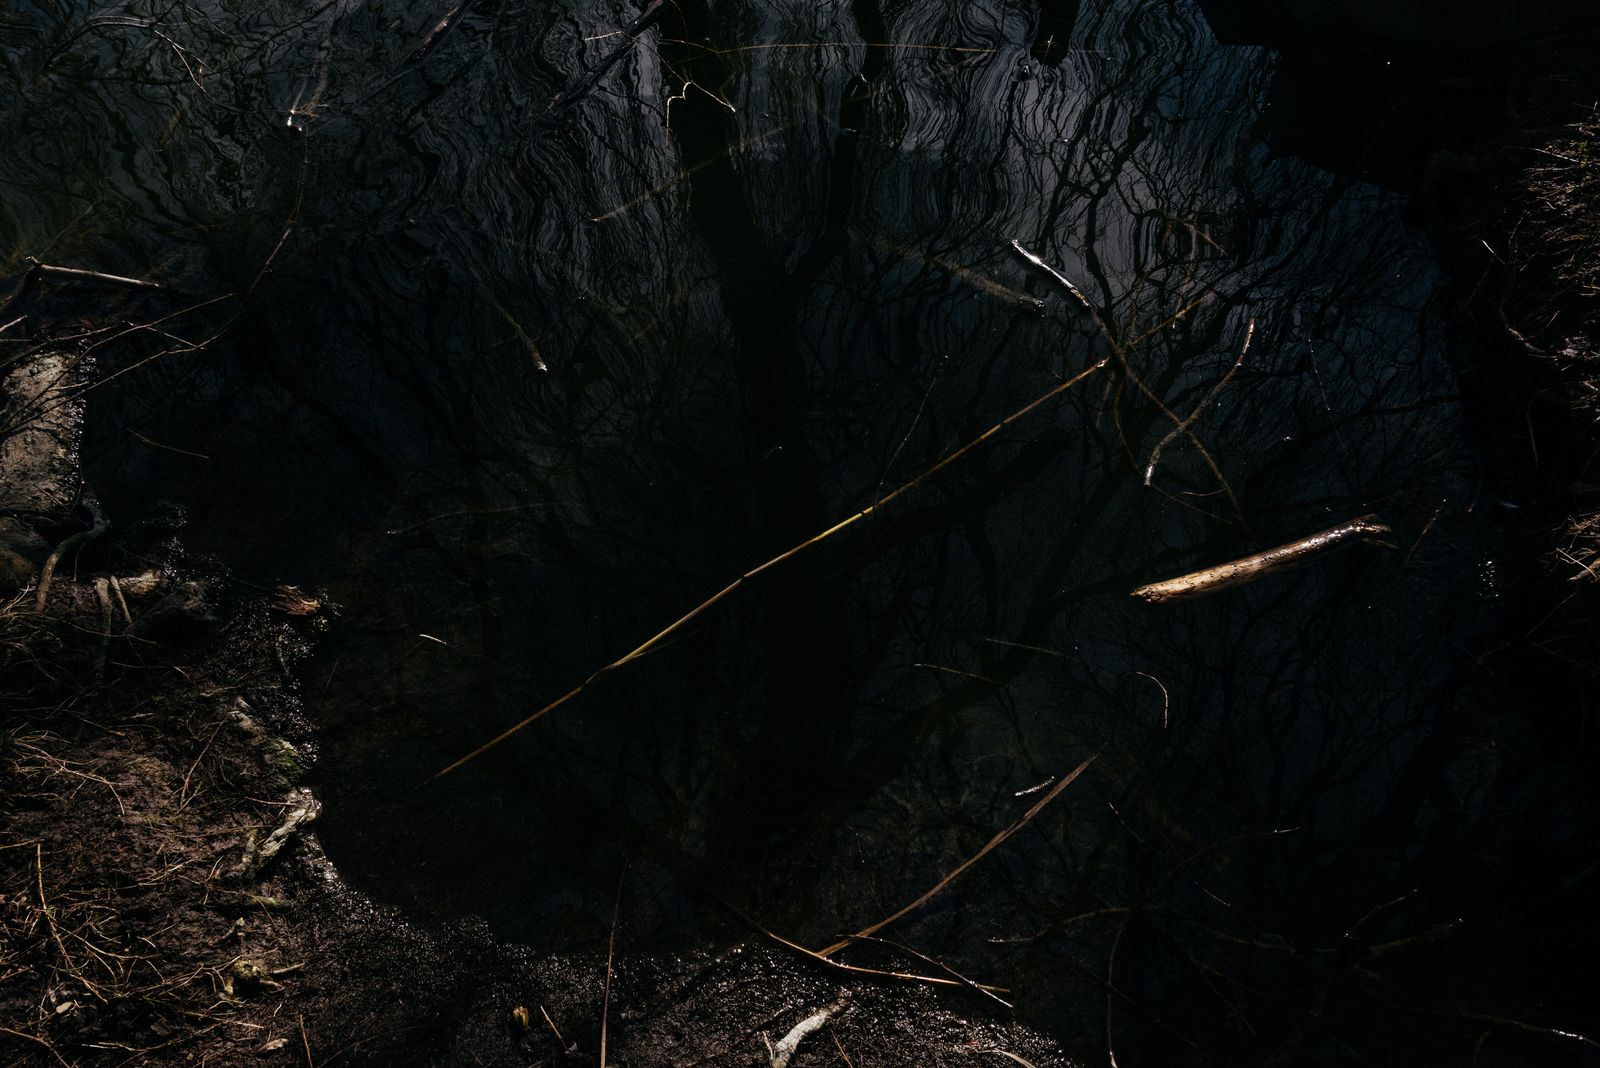 © Michelle Piergoelam - Image from the I heard water holds a secret photography project